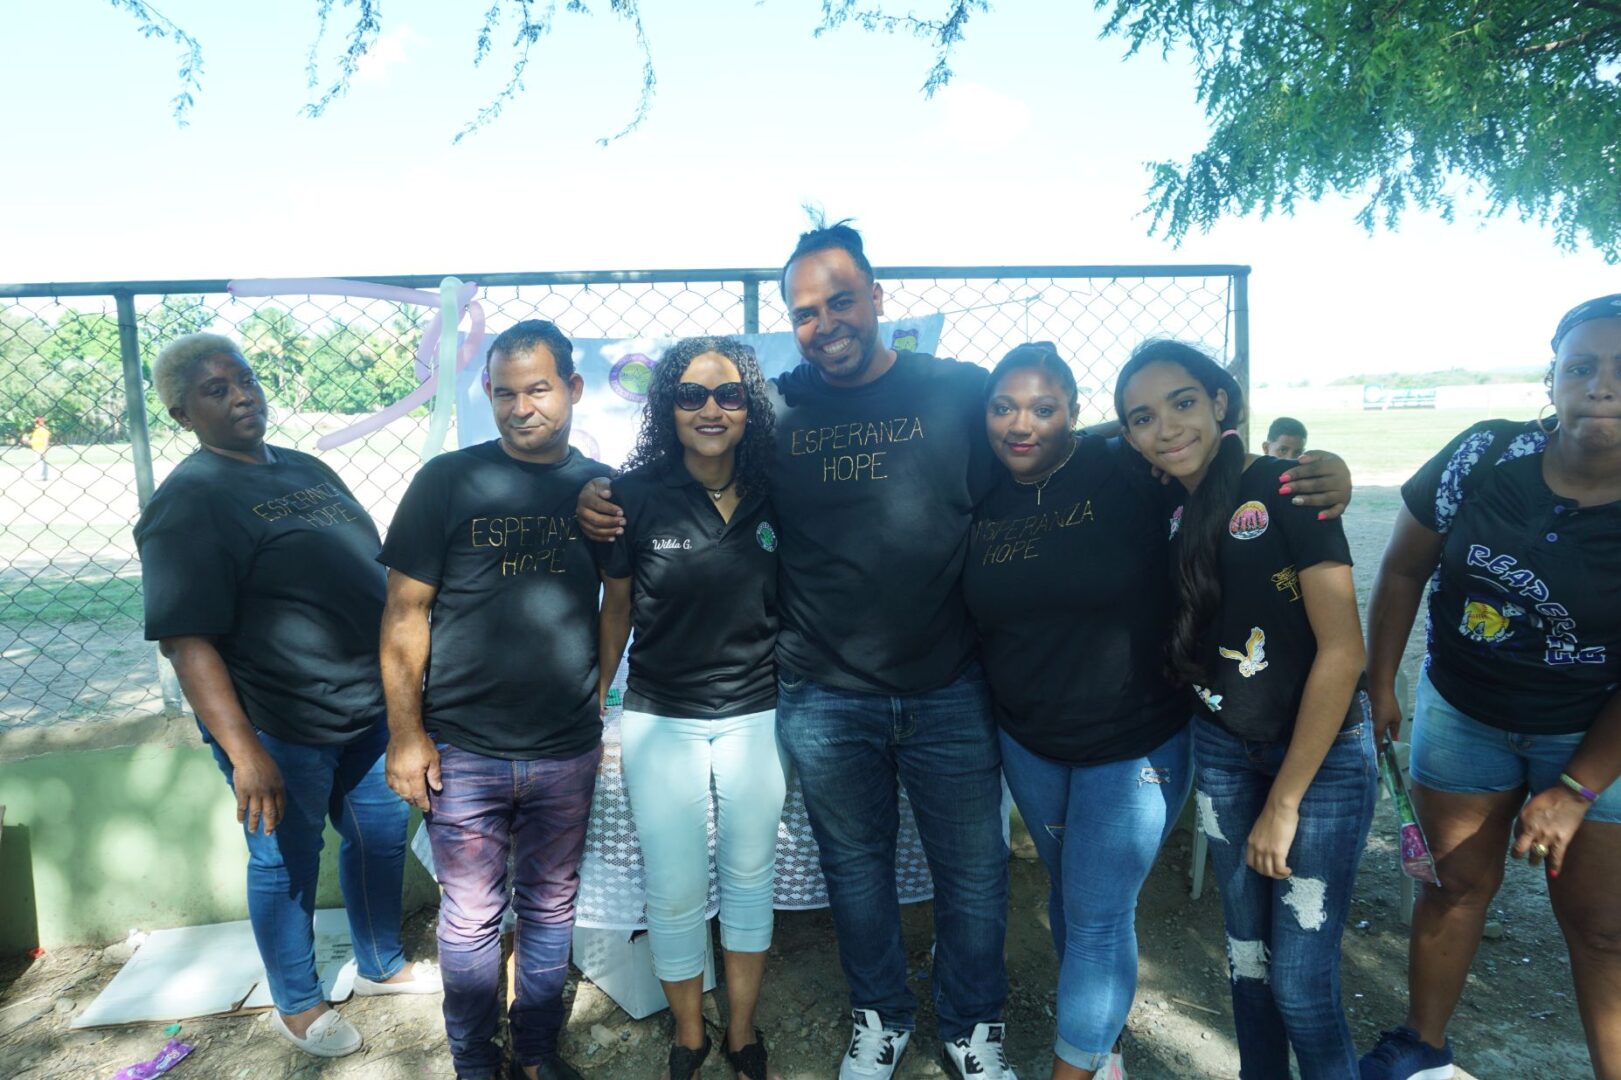 Two men and six women, all wearing black shirts and having their arms around each other